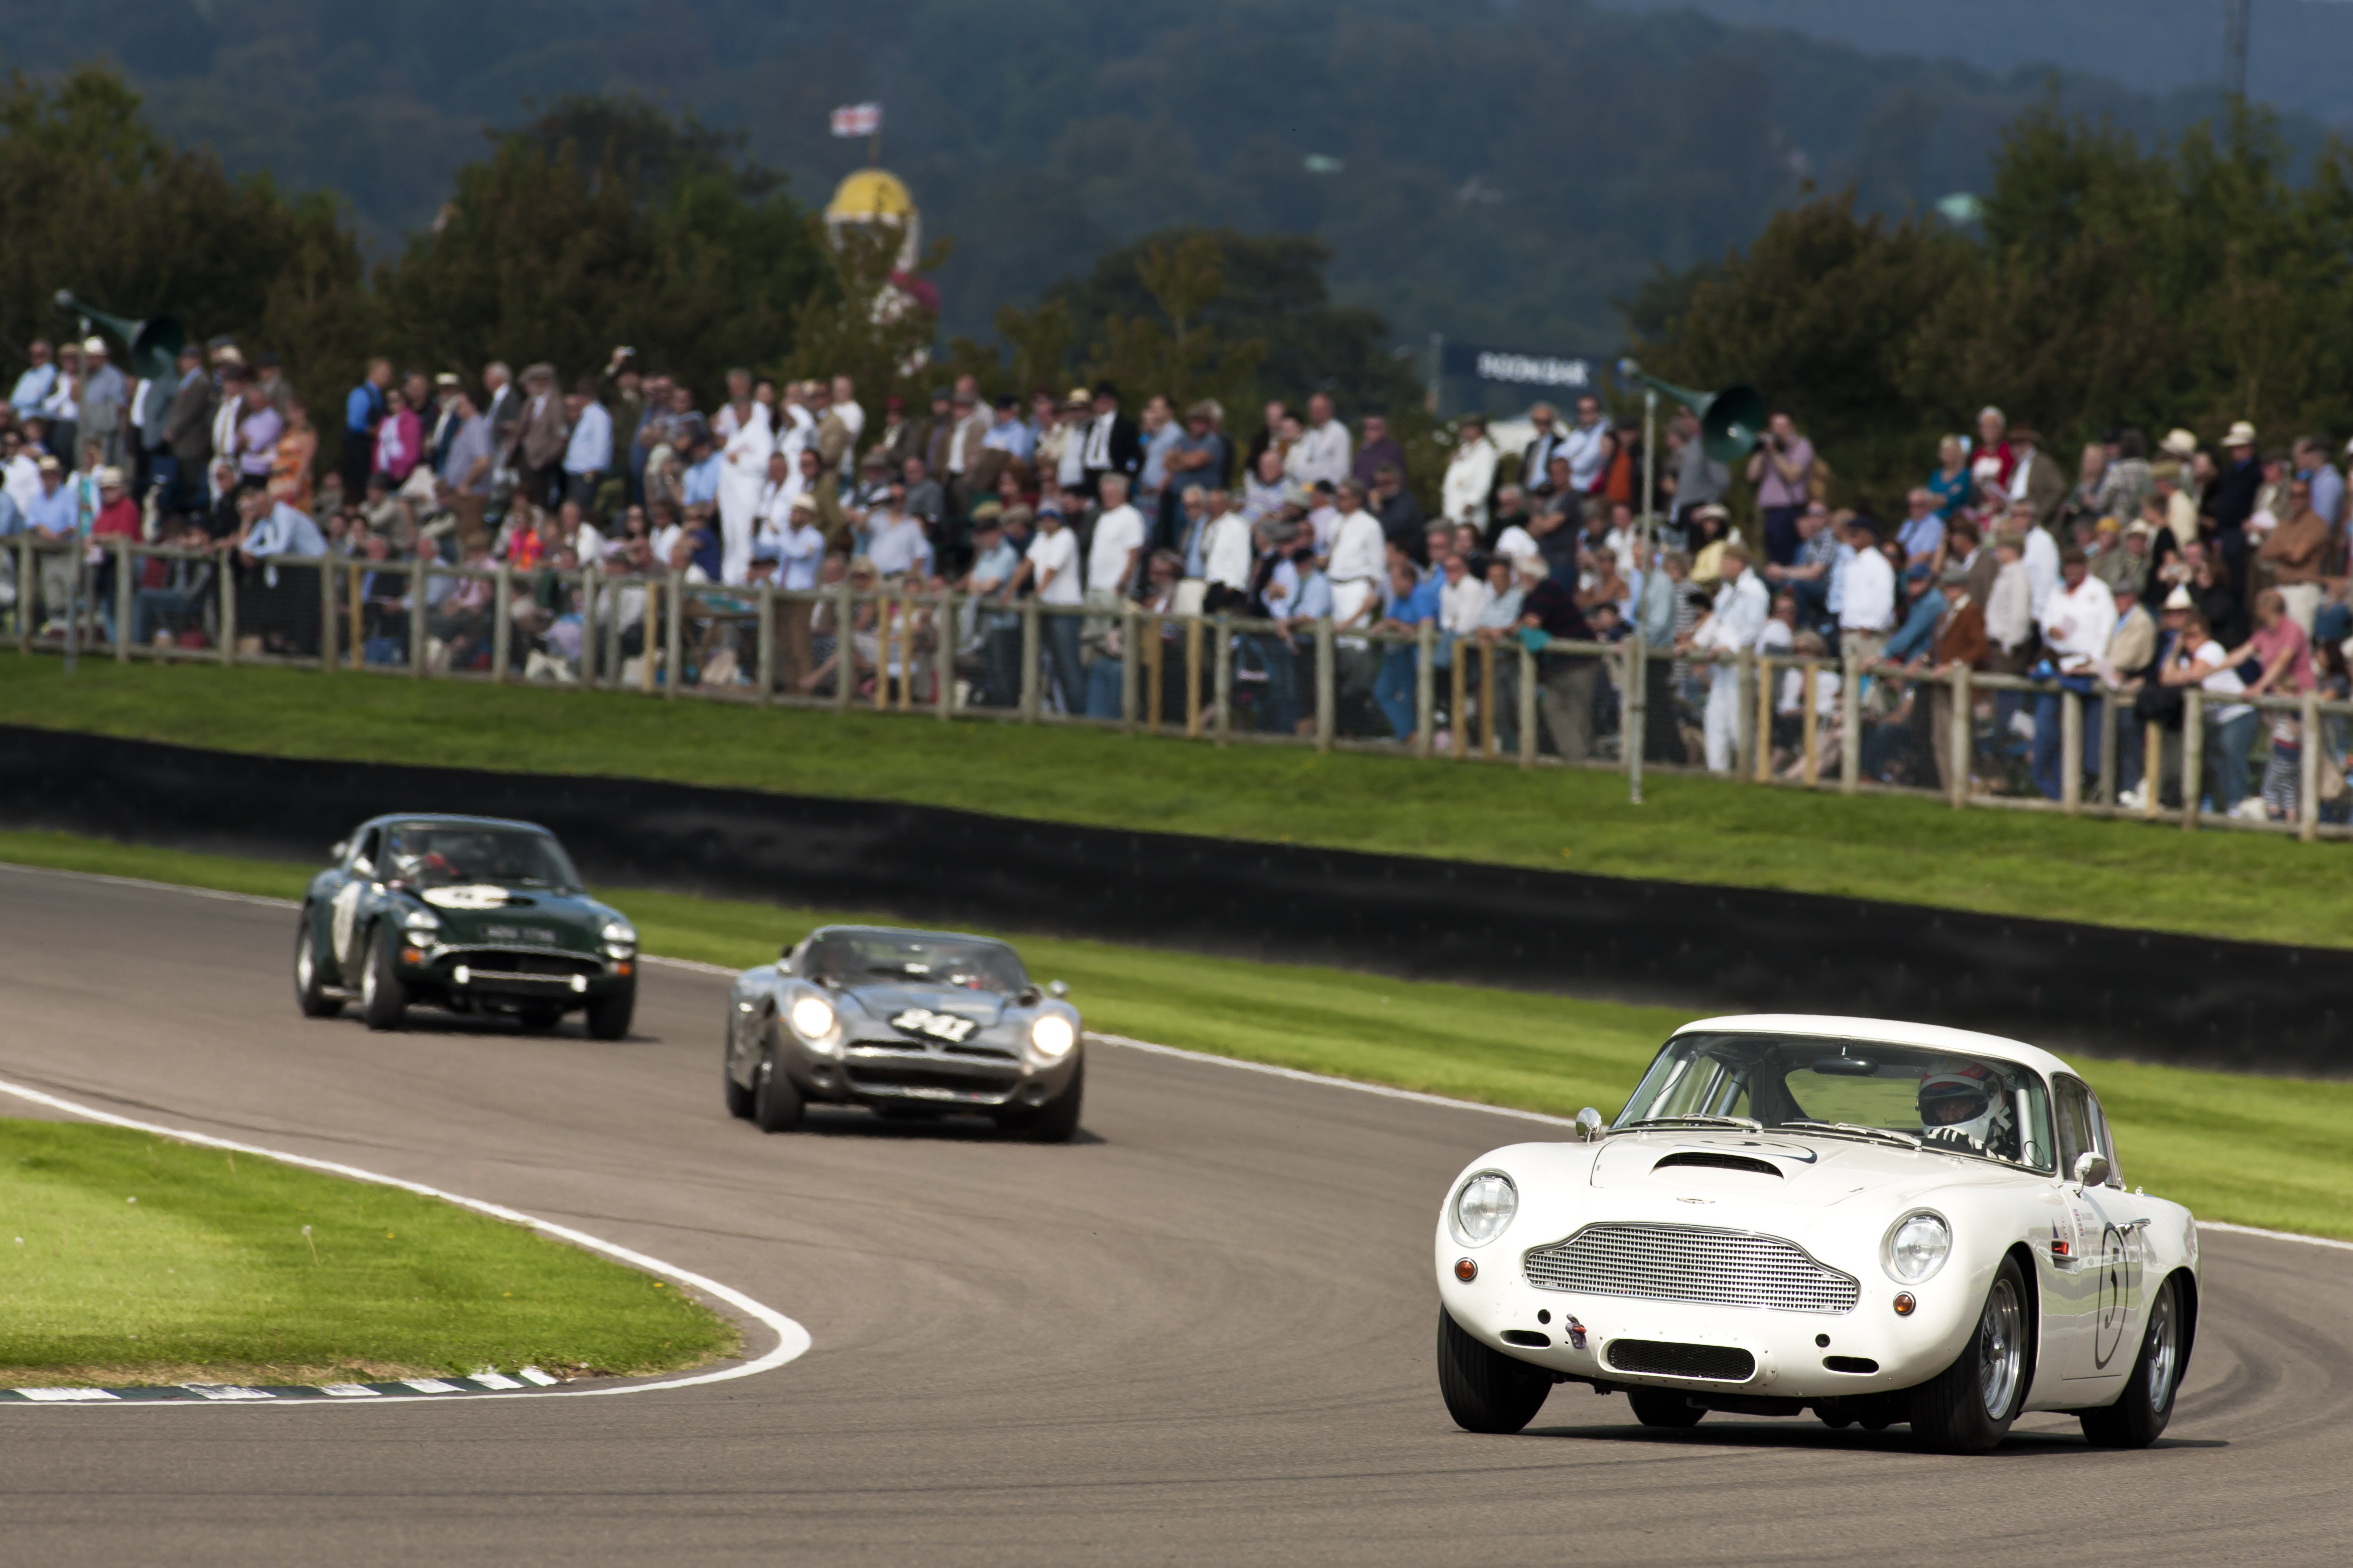 The 1 Hour RAC TT race includes a driver's swap with a celebrity racer. The Aston DB4 GT was surrounded bt Ferraris, Cobras and the most exotic race cars.